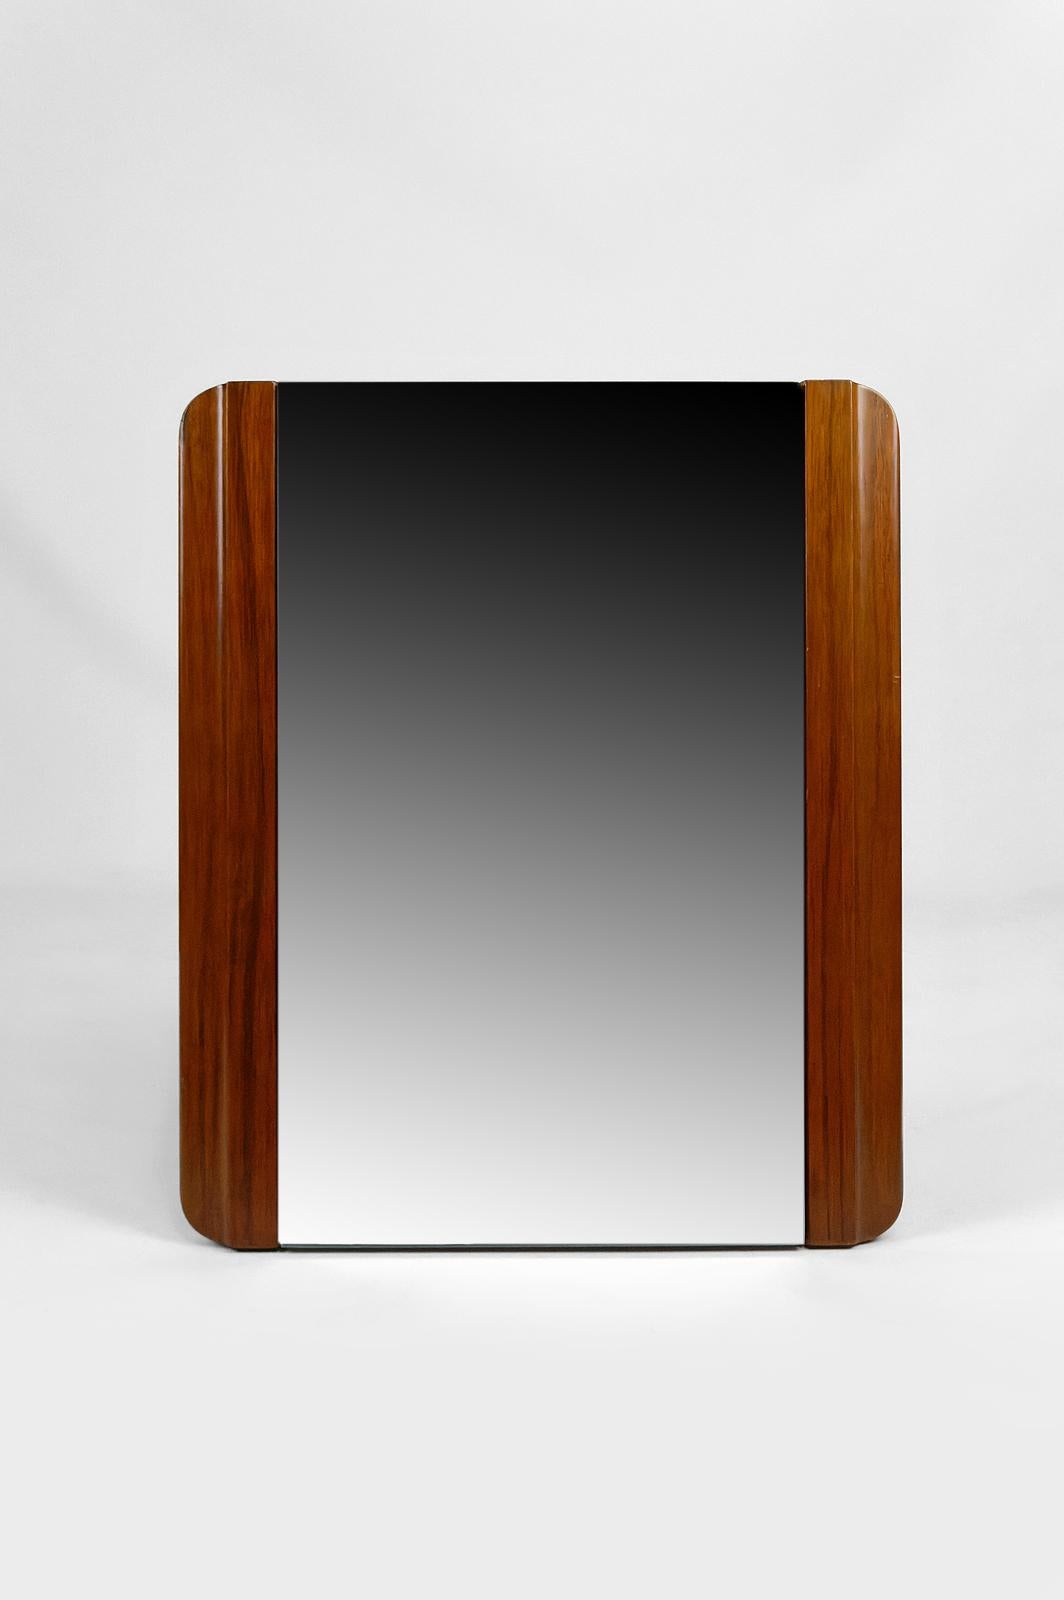 Elegant mahogany table/stand mirror.

Modernist Art Deco, France, circa 1925-1930.

In very good condition.

Total dimensions:
height 54 cm
width 47 cm
depth 15 cm

Dimensions of the mirror glass: 33 x 54 cm